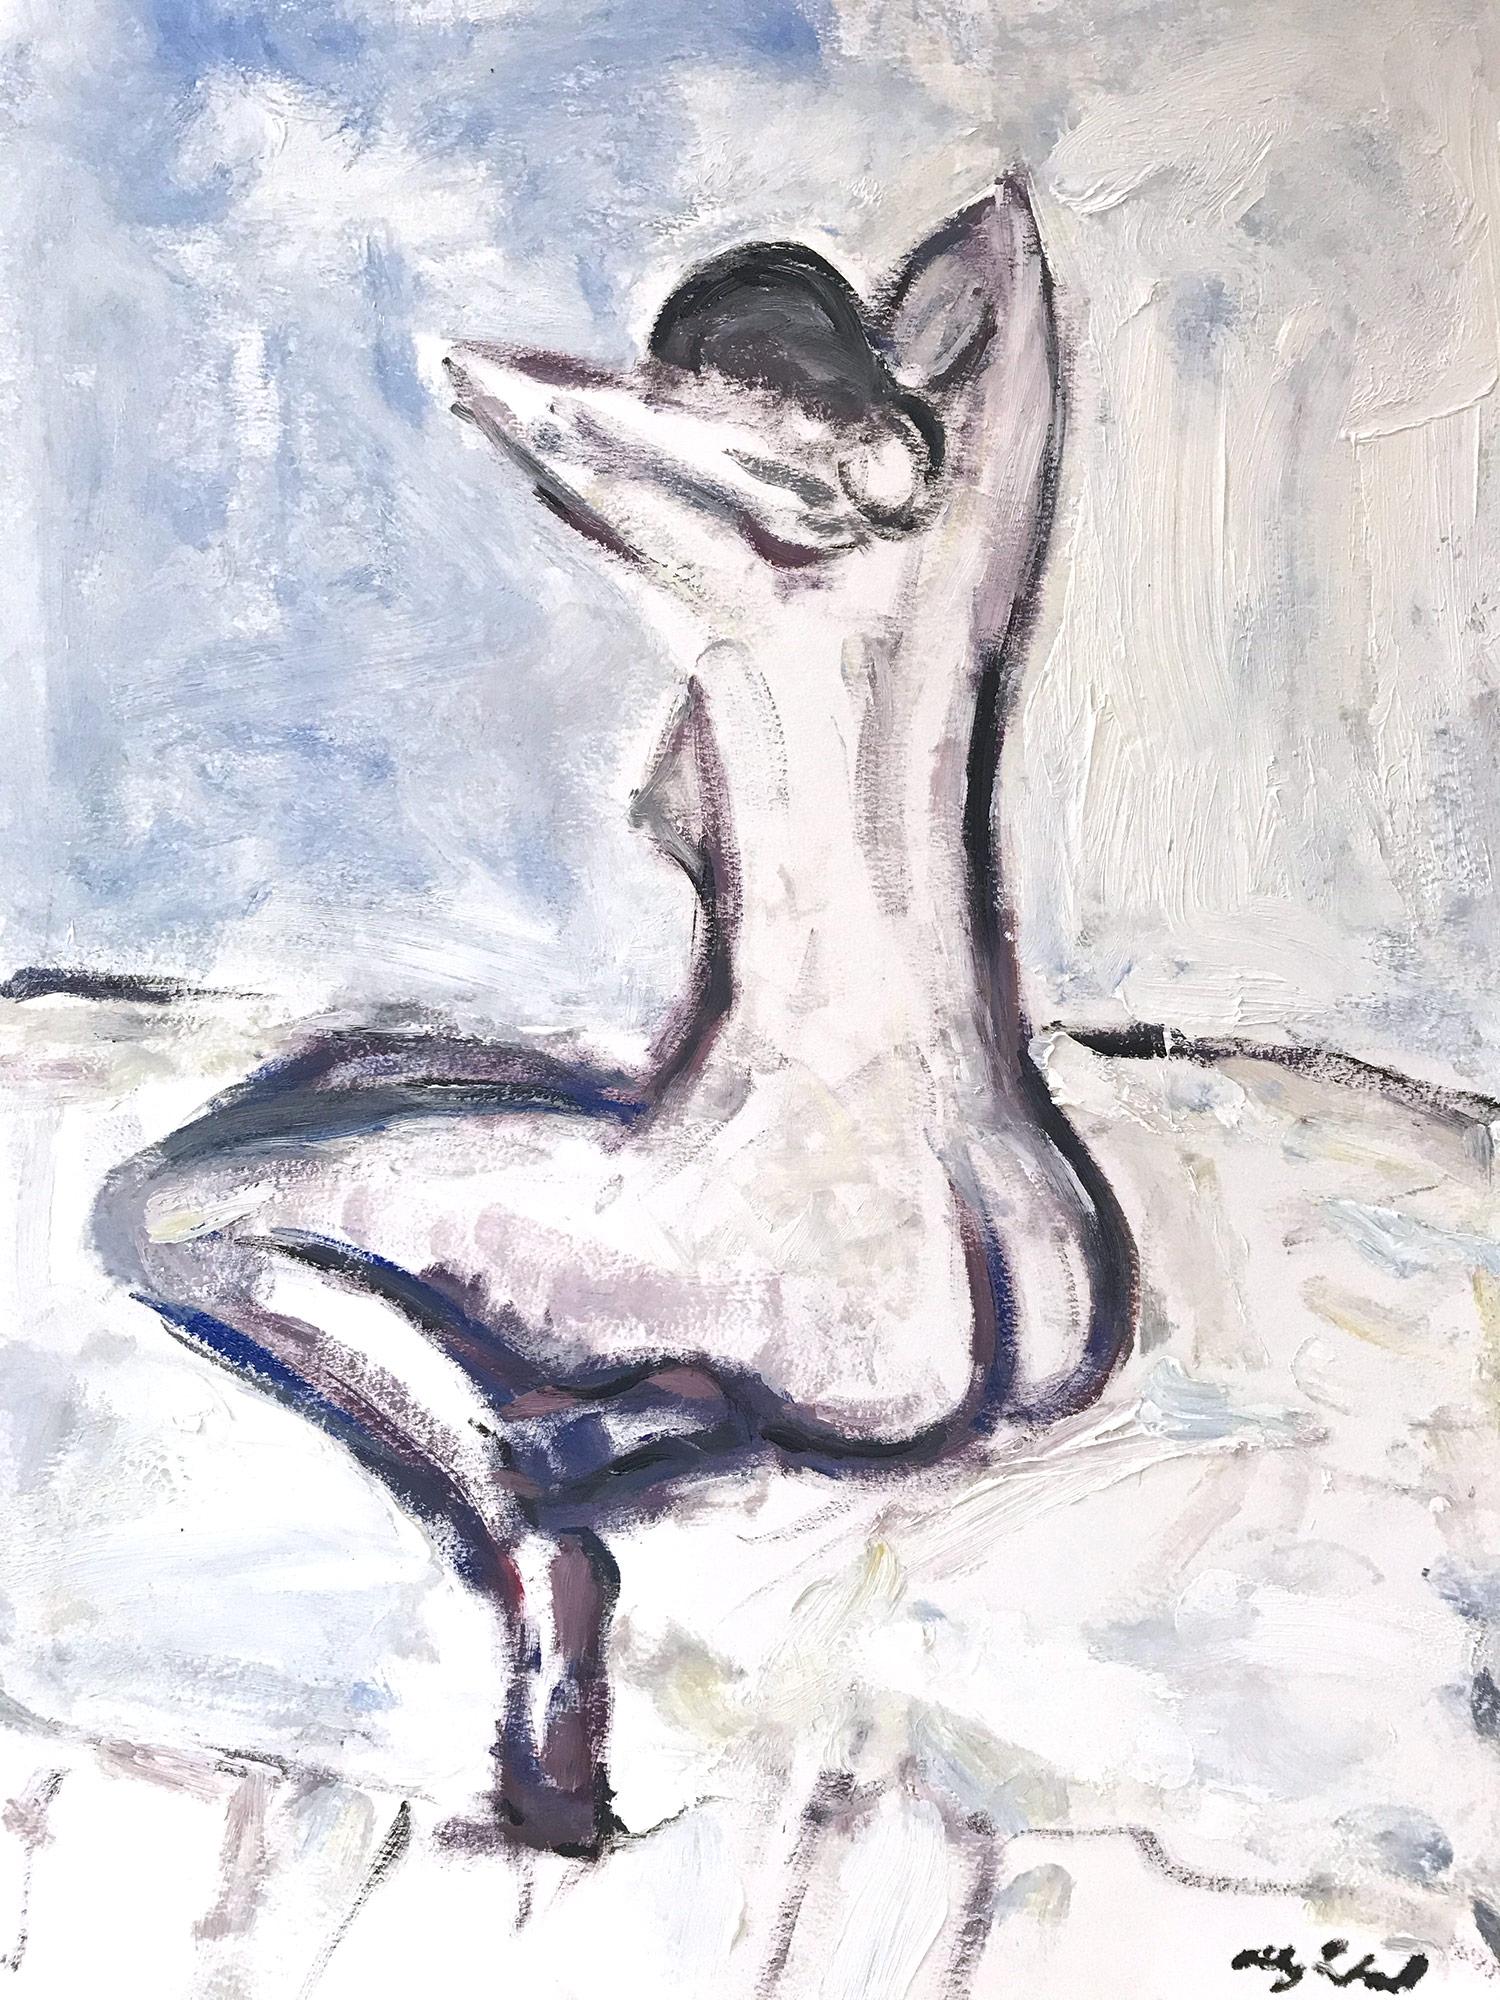 Cindy Shaoul Abstract Painting - "Bather Study" After Modigliani Nude Oil Painting on Heavy Weight Paper